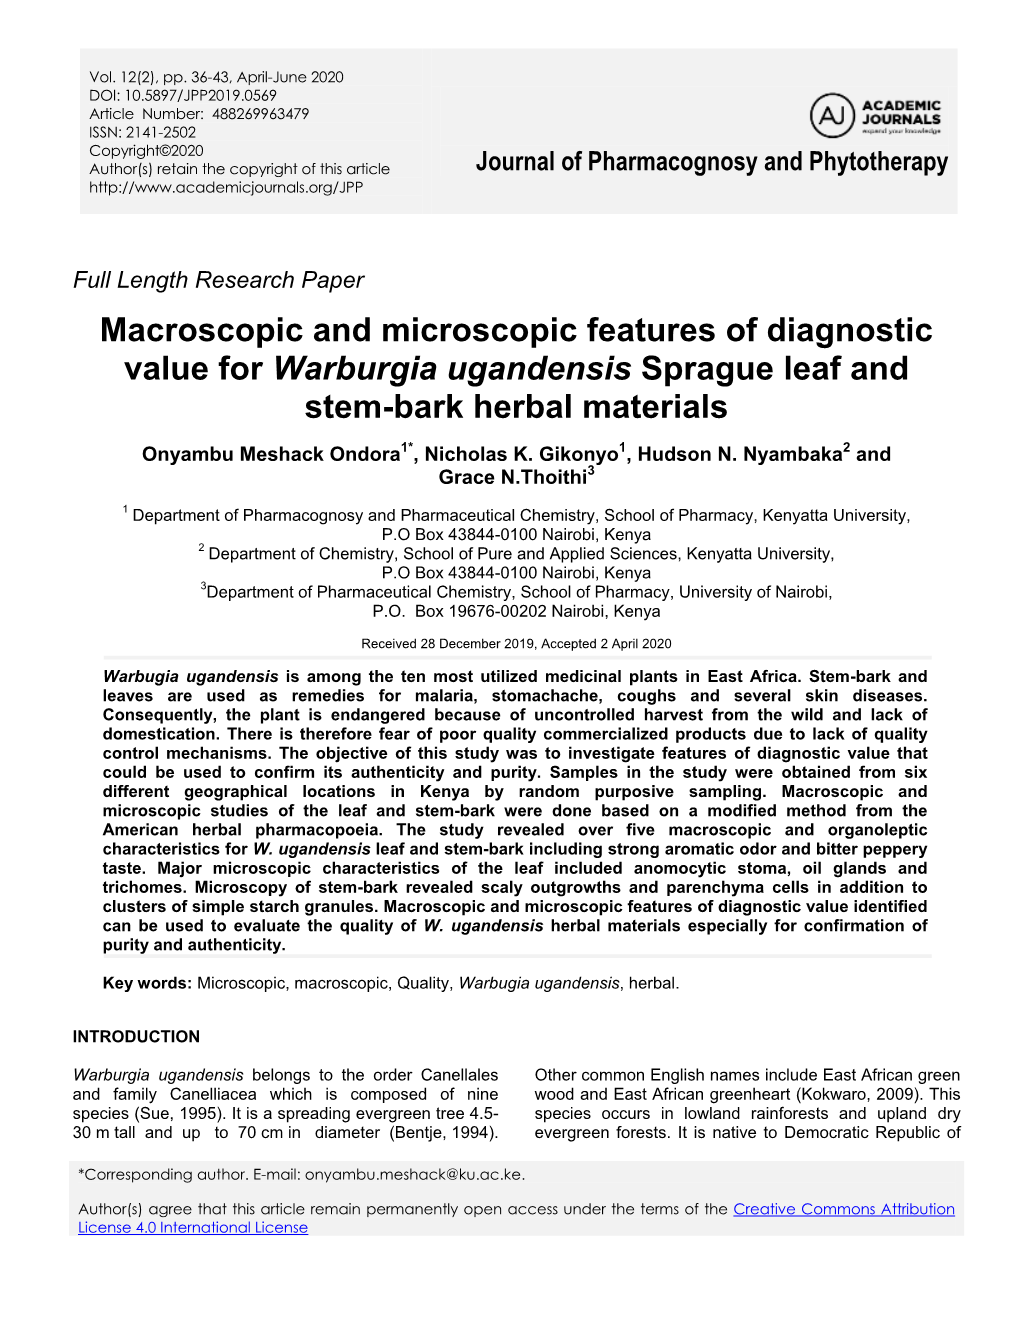 Macroscopic and Microscopic Features of Diagnostic Value for Warburgia Ugandensis Sprague Leaf and Stem-Bark Herbal Materials